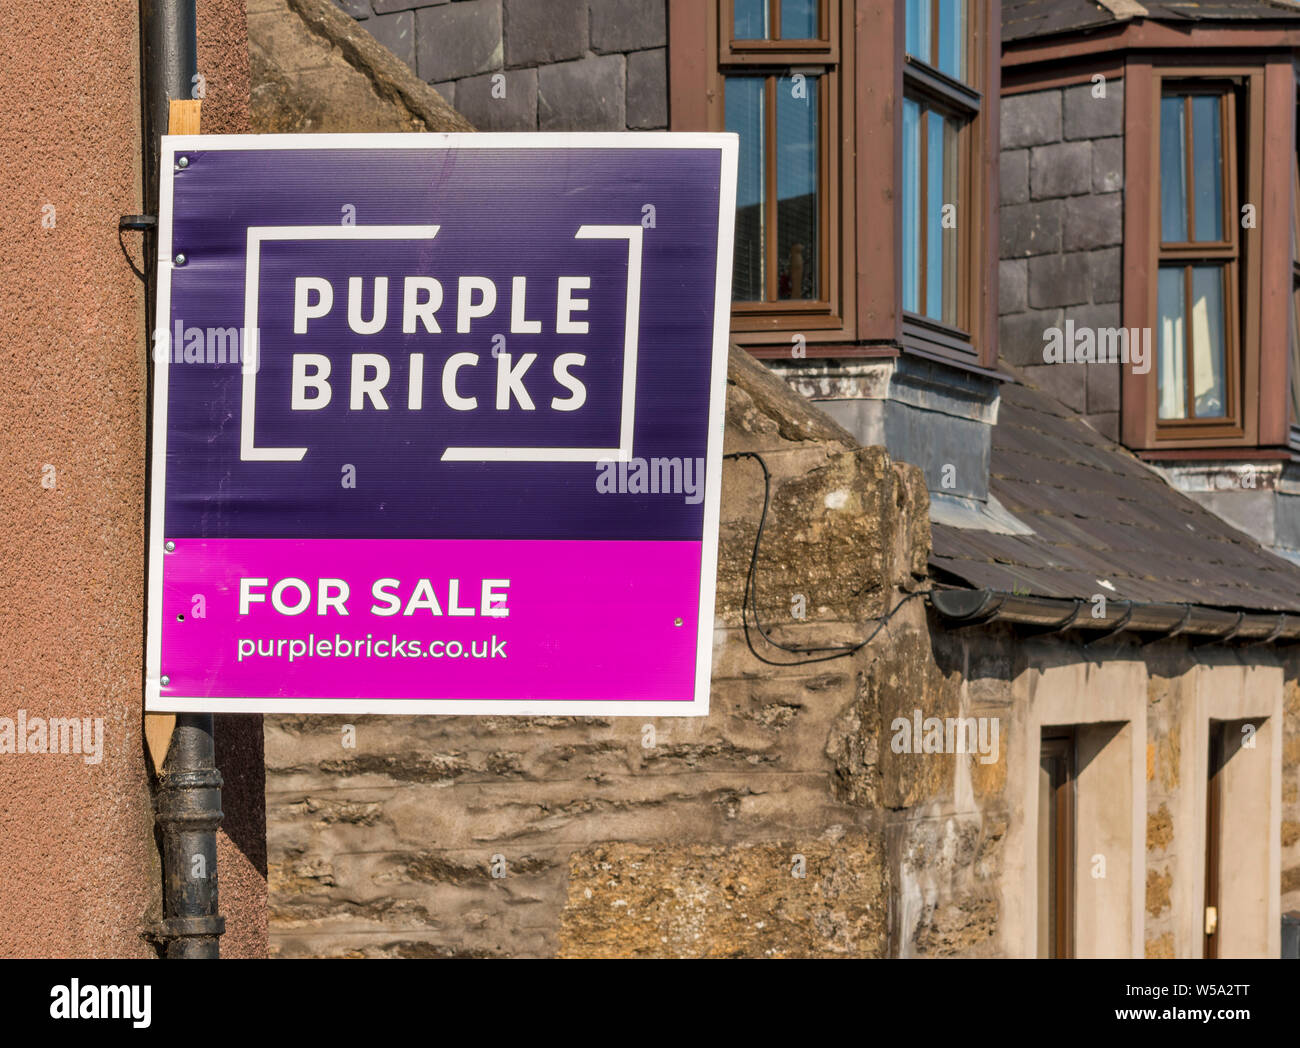 PURPLE BRICKS FOR SALE SIGN ON WALL OF A HOUSE Stock Photo